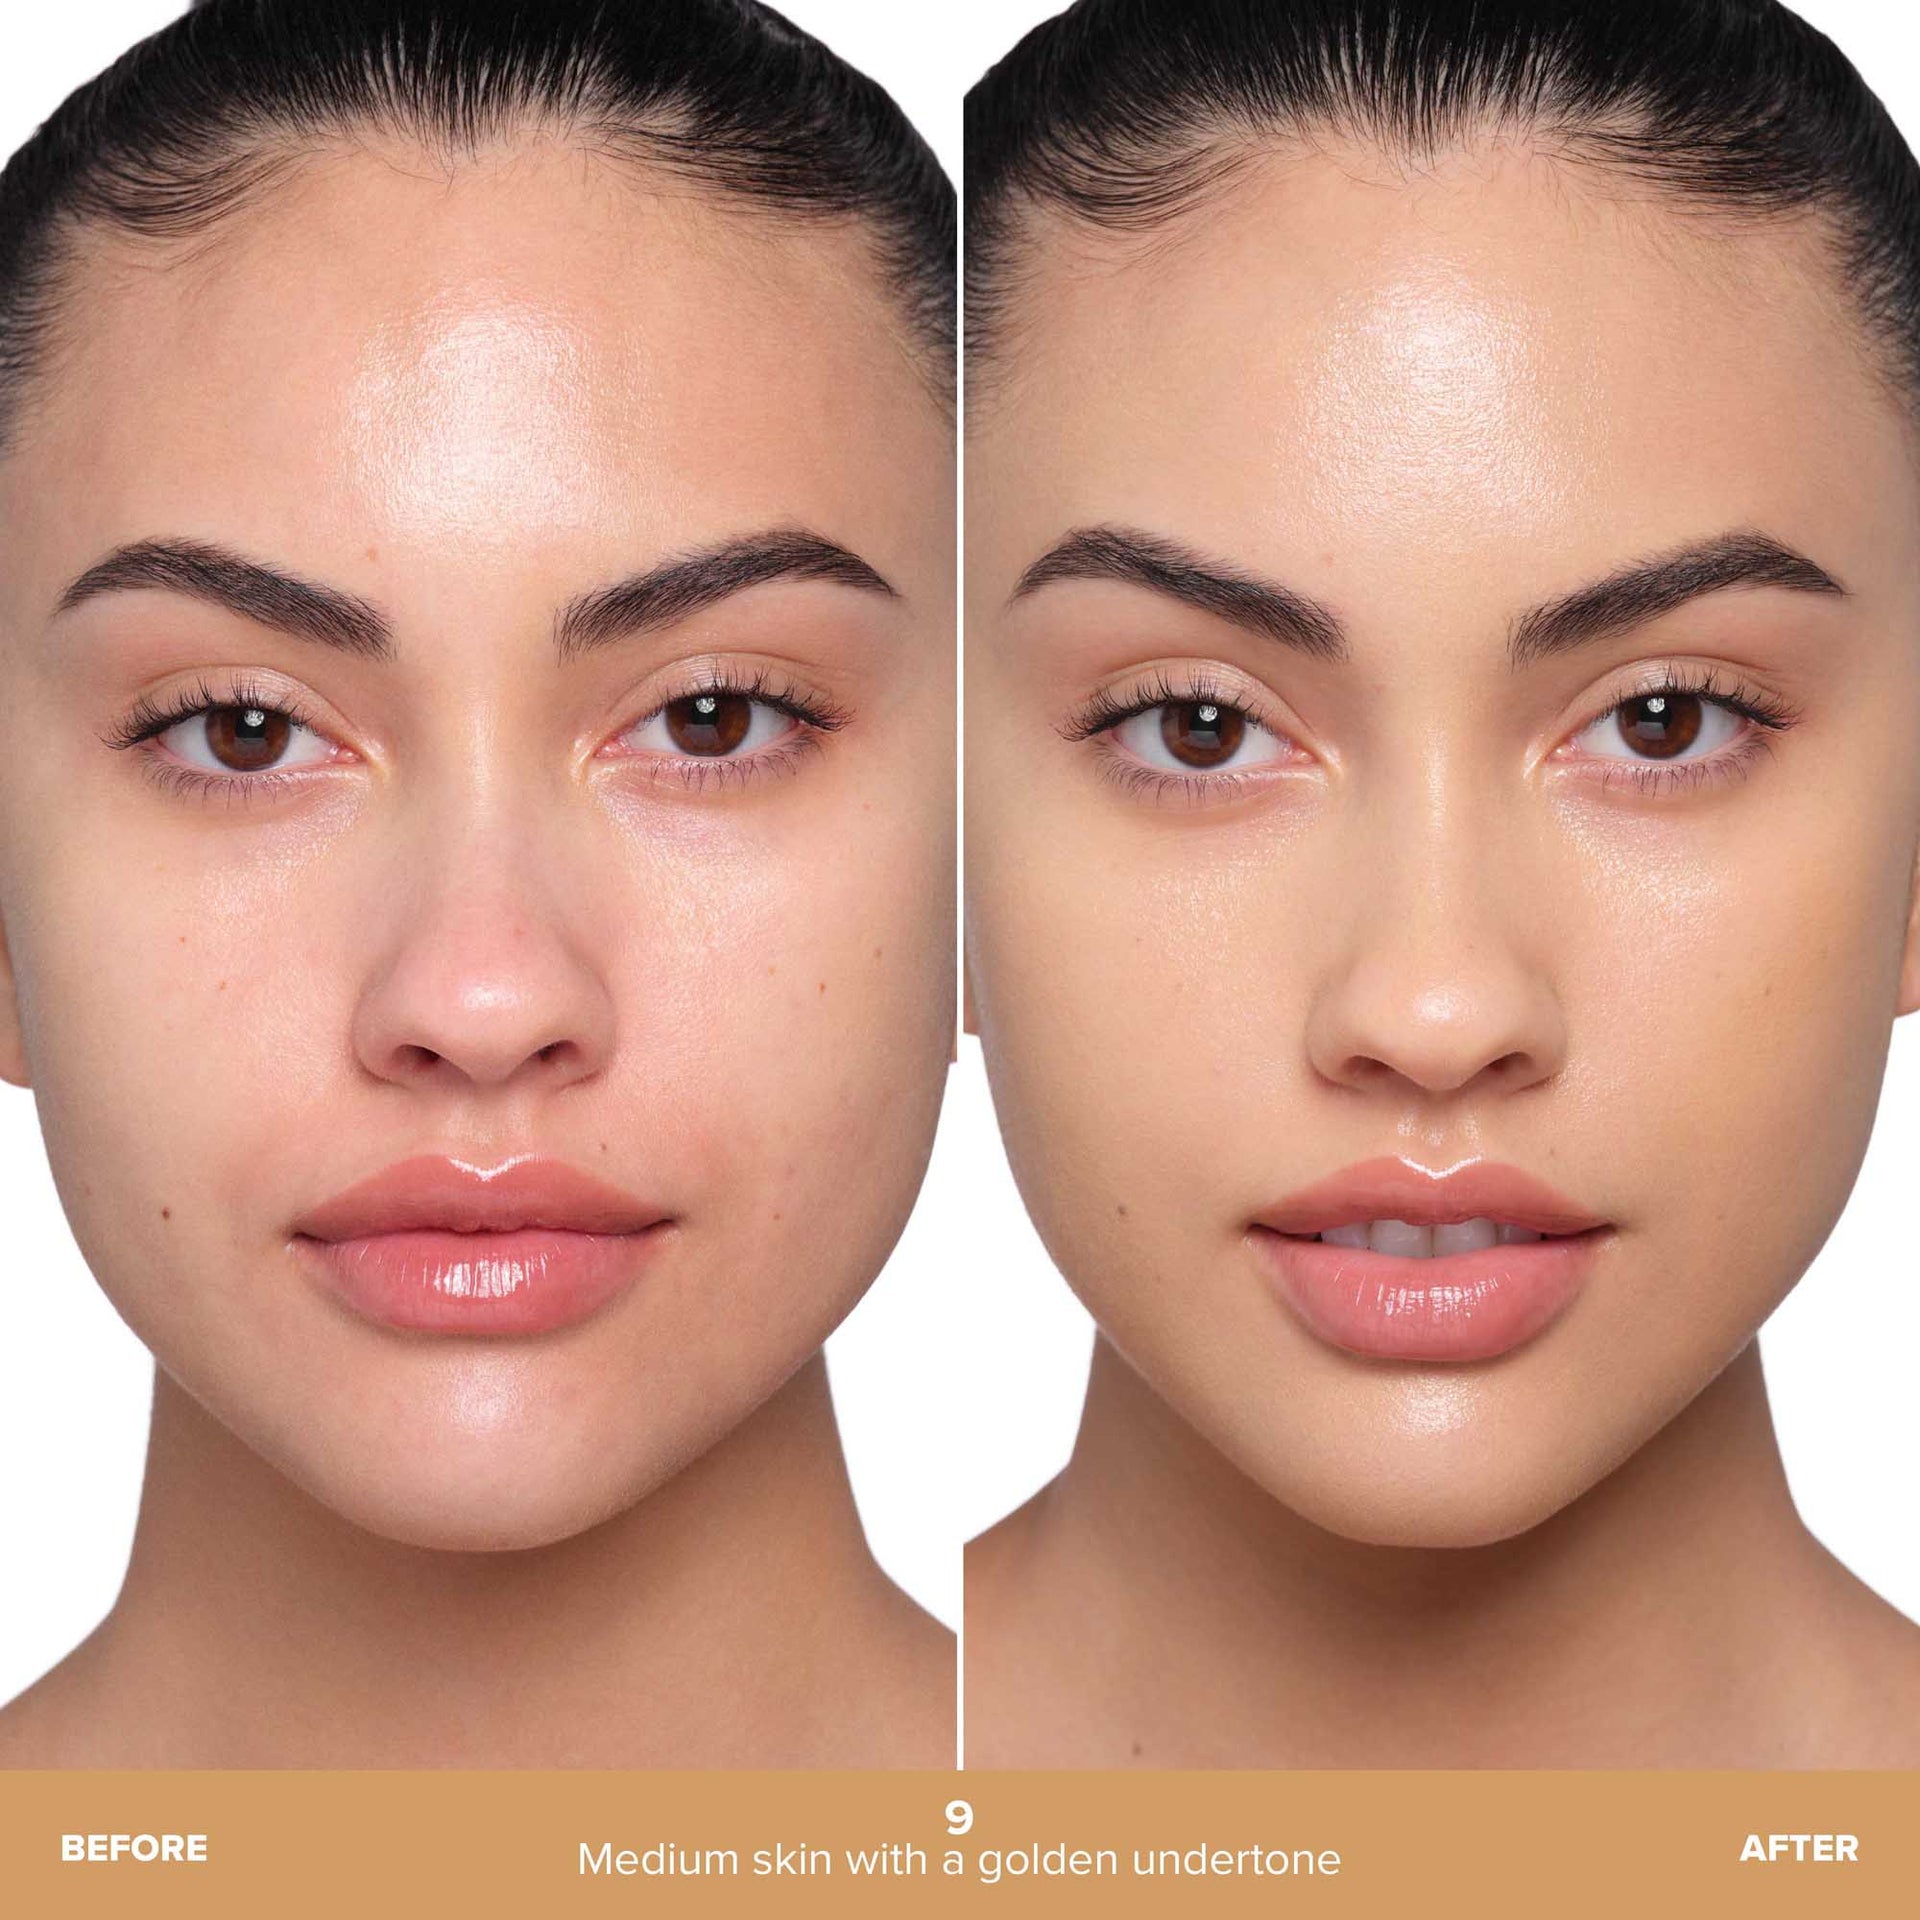 Shade 9 | Beauty Balm Serum Boosted Skin Tint Before & After - Shade 9